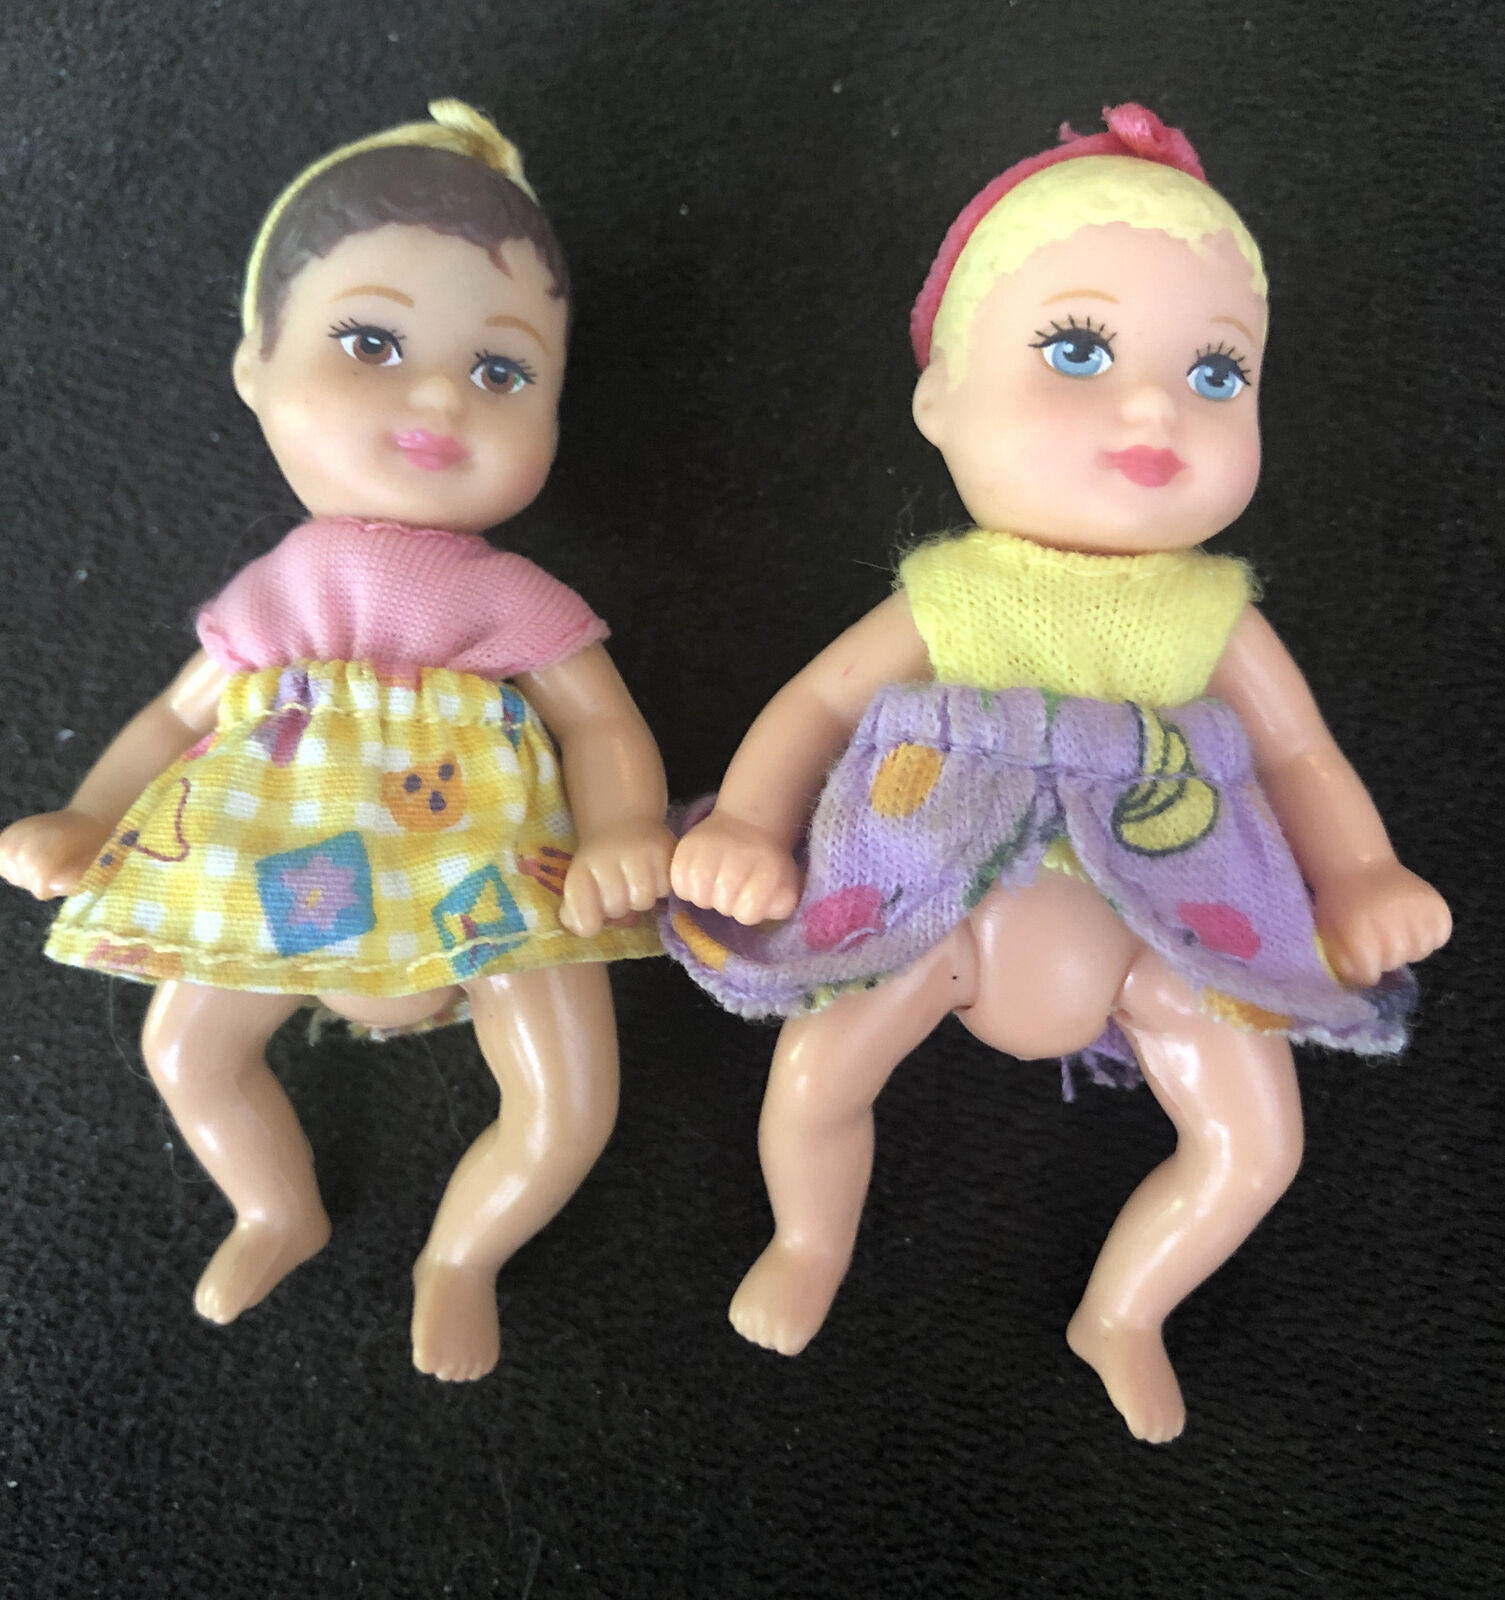 Barbie Happy Family Krissy Baby Doll Twins 1998 Mattel Jointed 3"